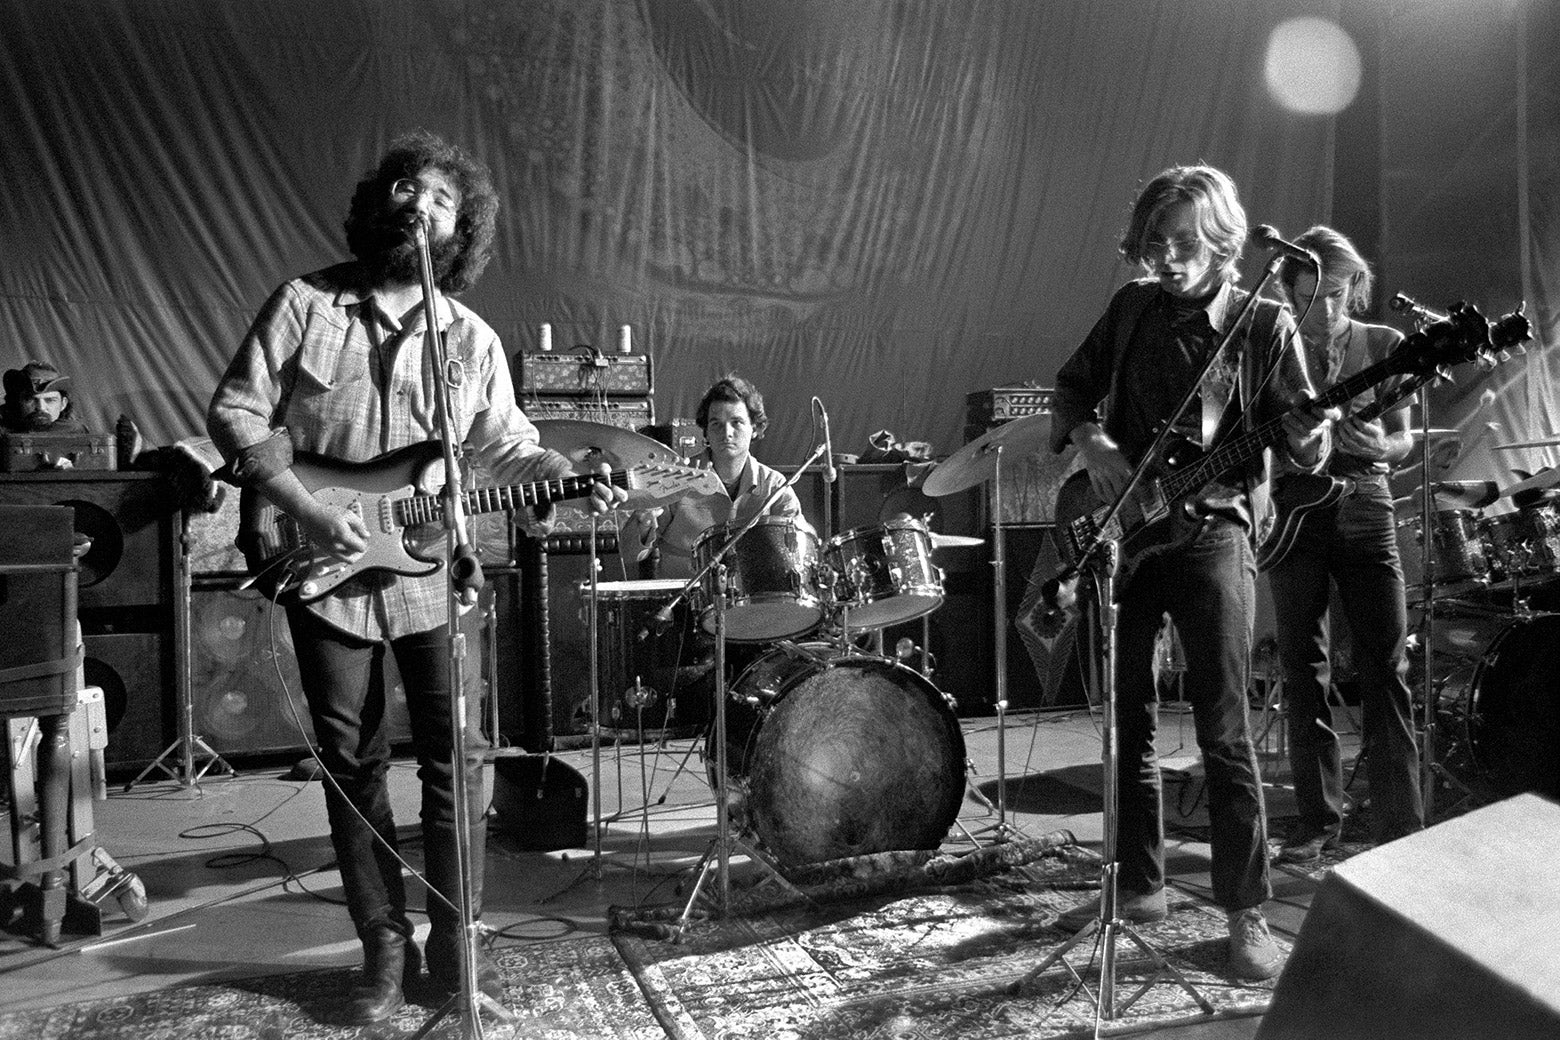 An archival black-and-white photo of the Grateful Dead performing onstage.